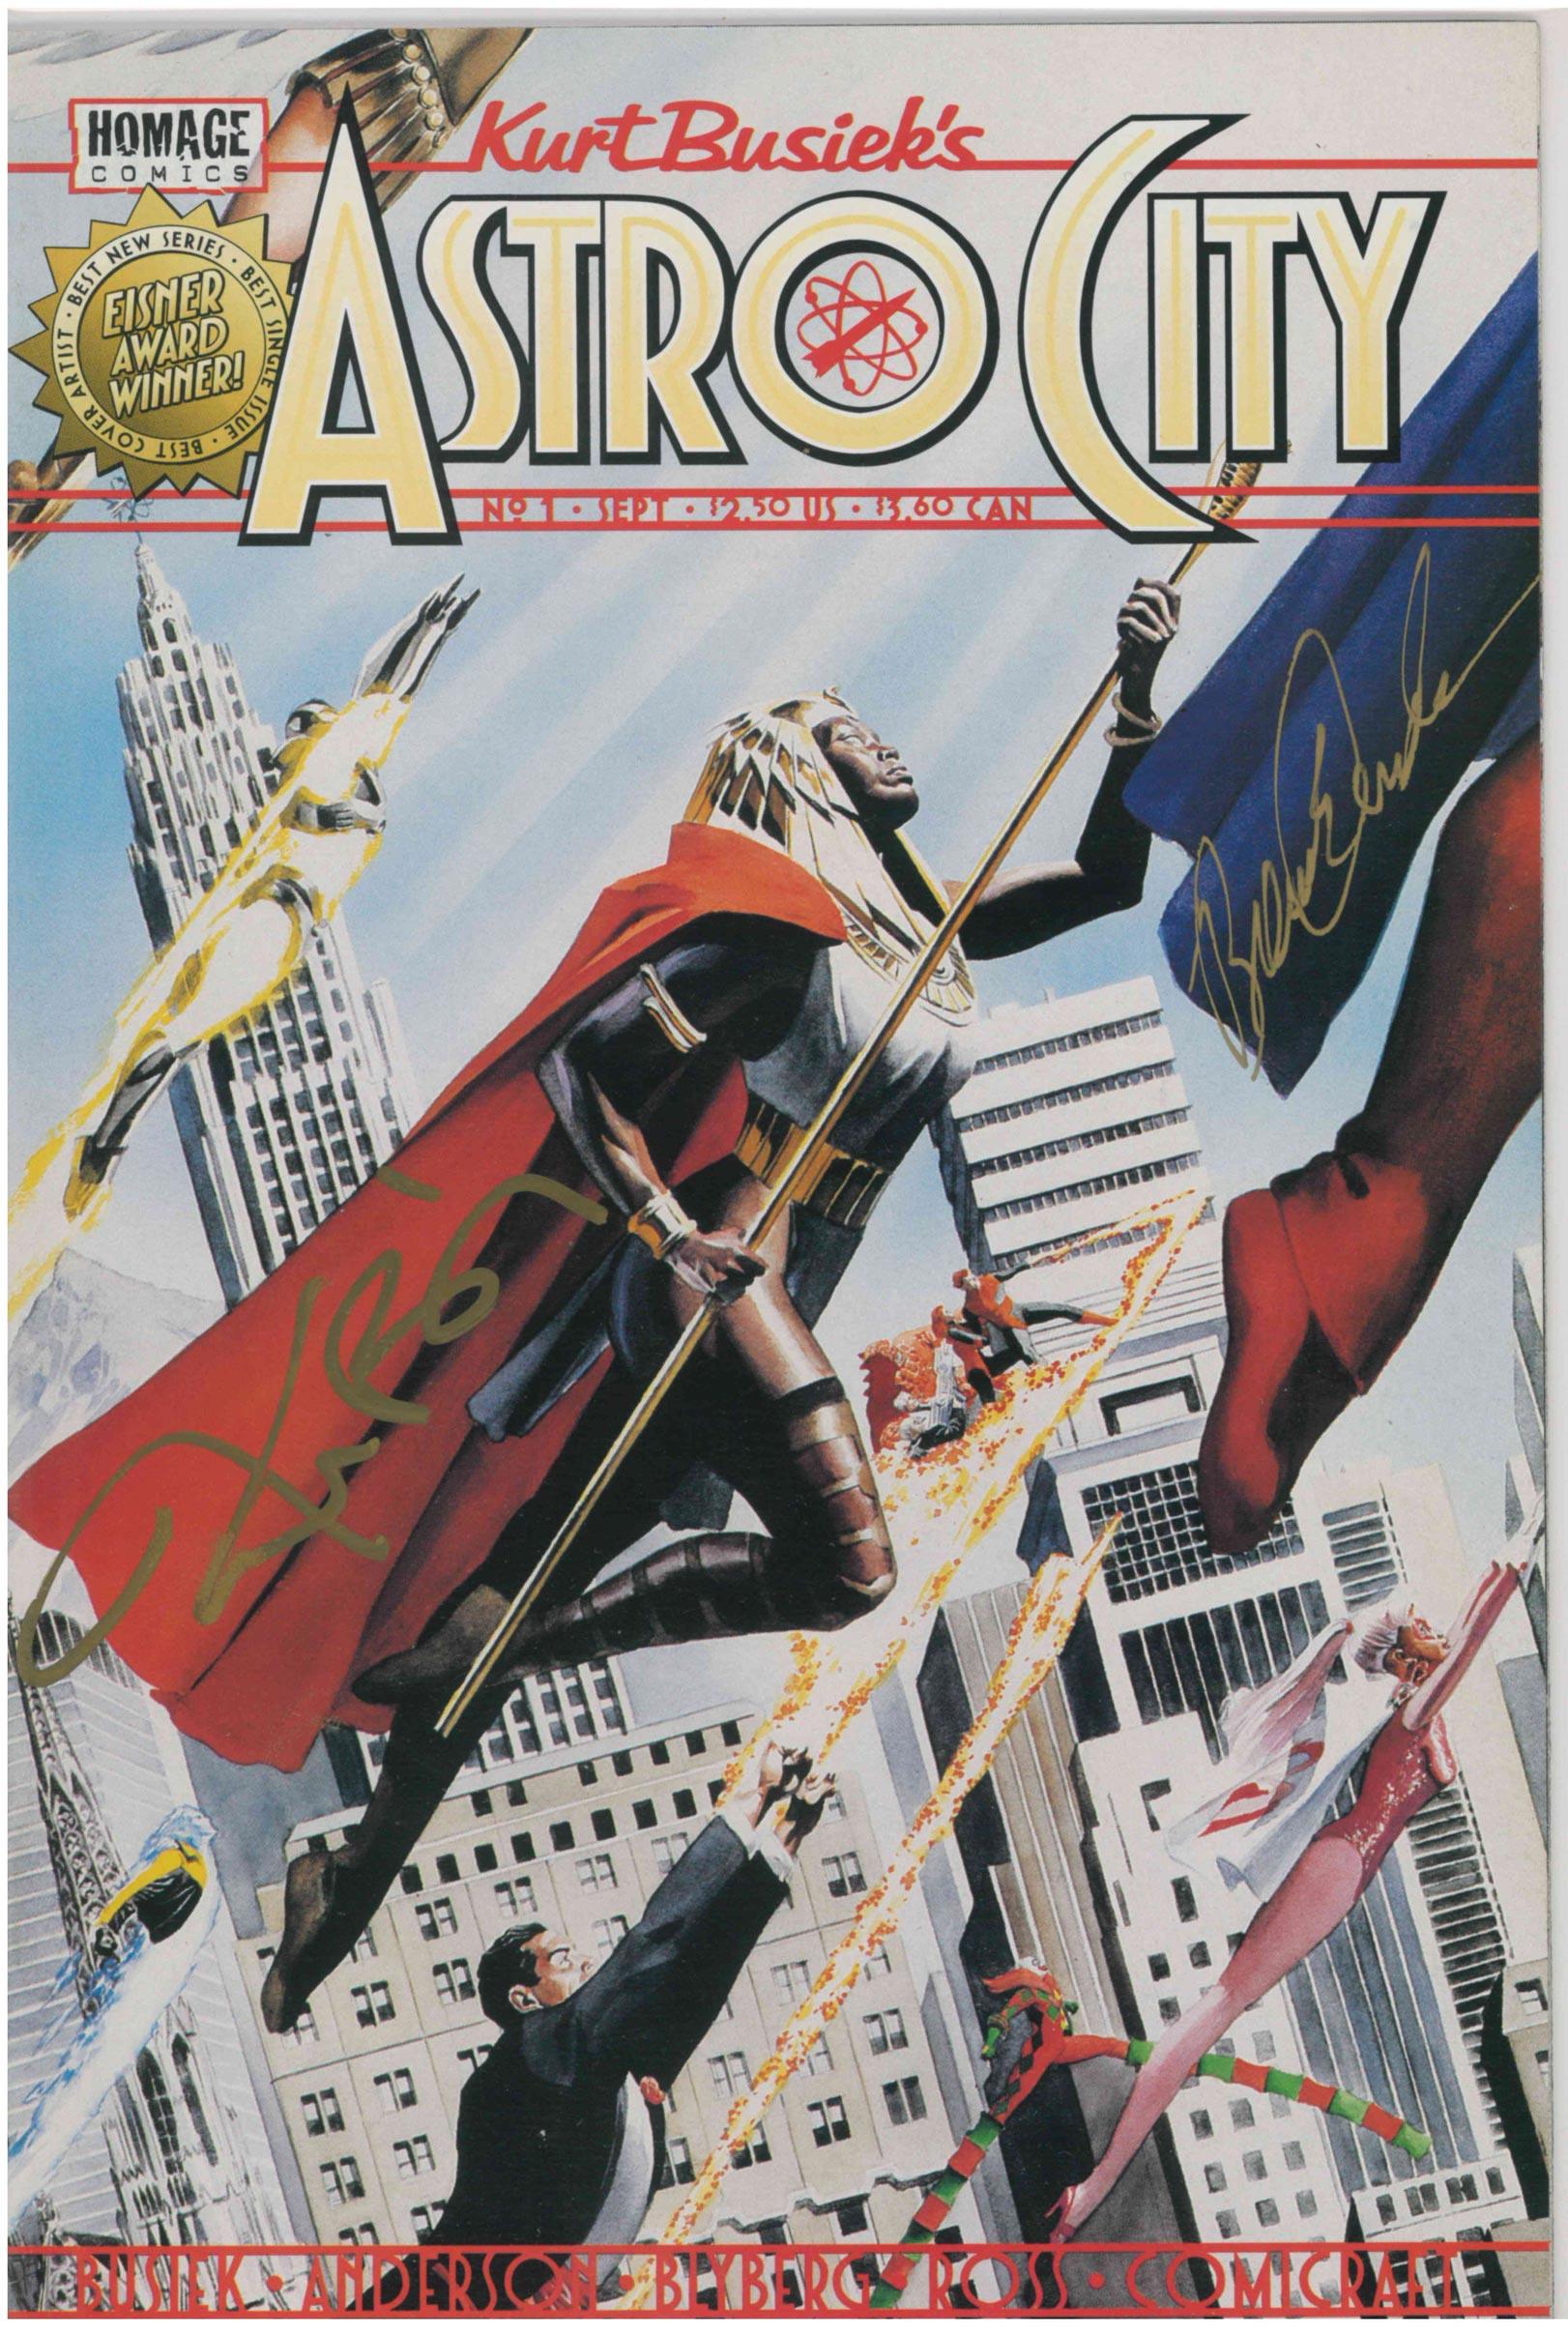 ASTRO CITY (1996) #1 - SIGNED BY KURT BUSIEK AND BRENT ANDERSON - Kings Comics